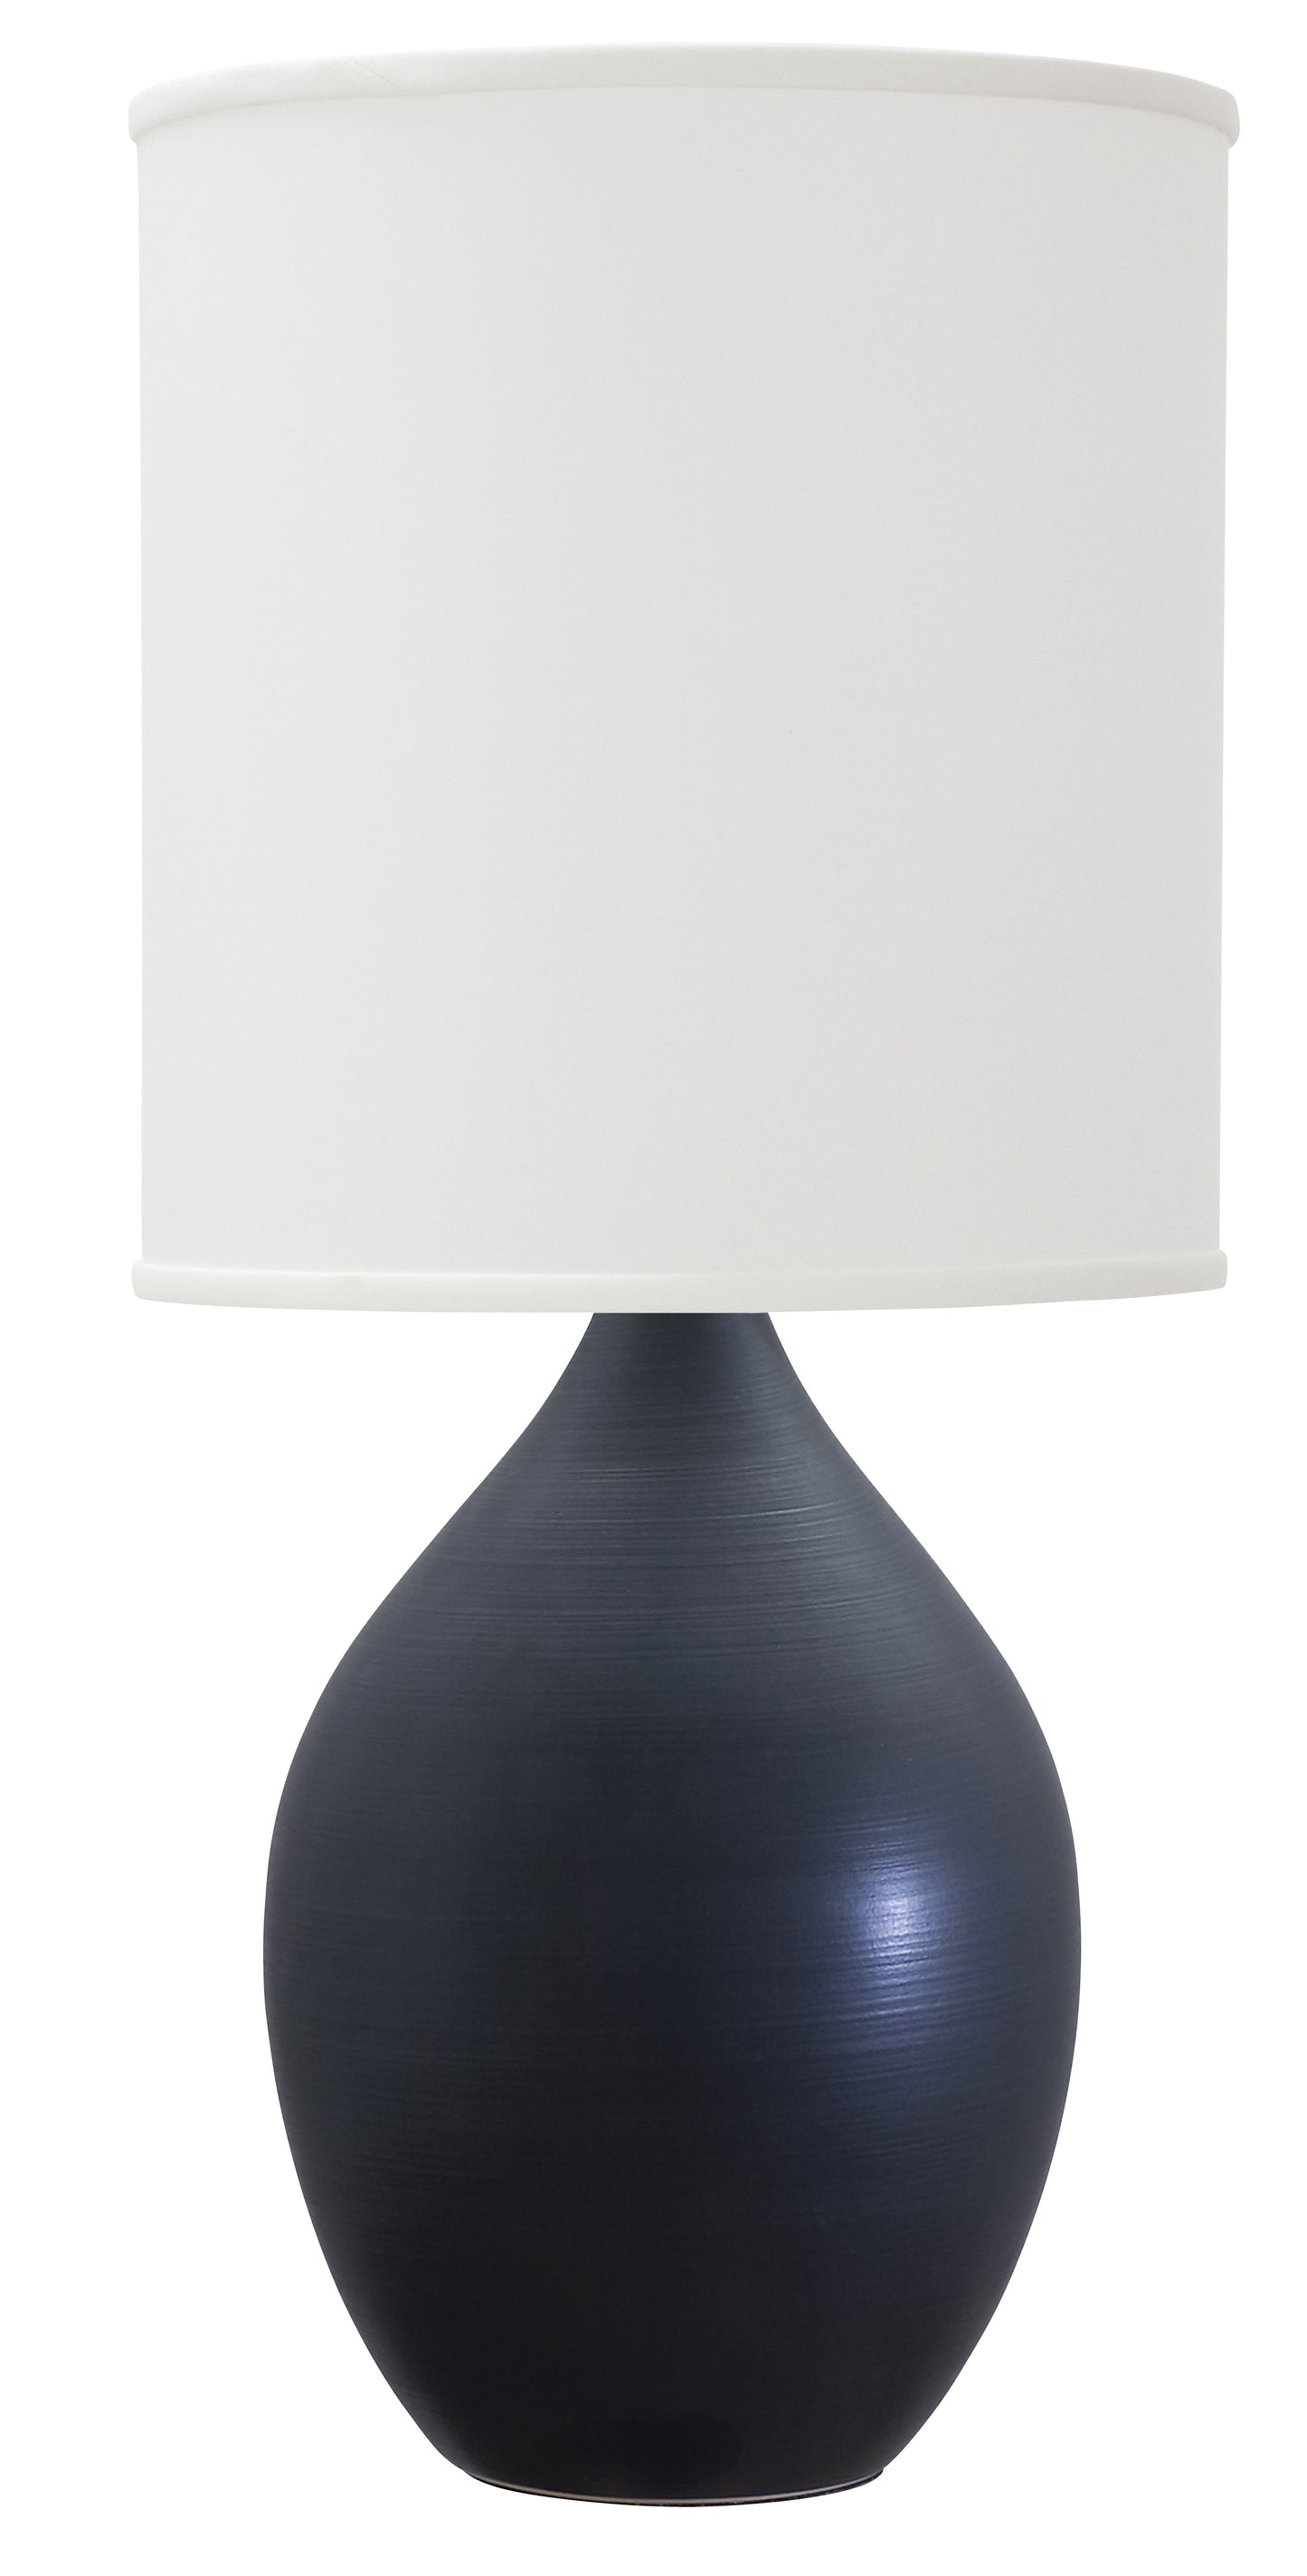 House of Troy Scatchard 20.5" Stoneware Table Lamp in Black Matte GS201-BM